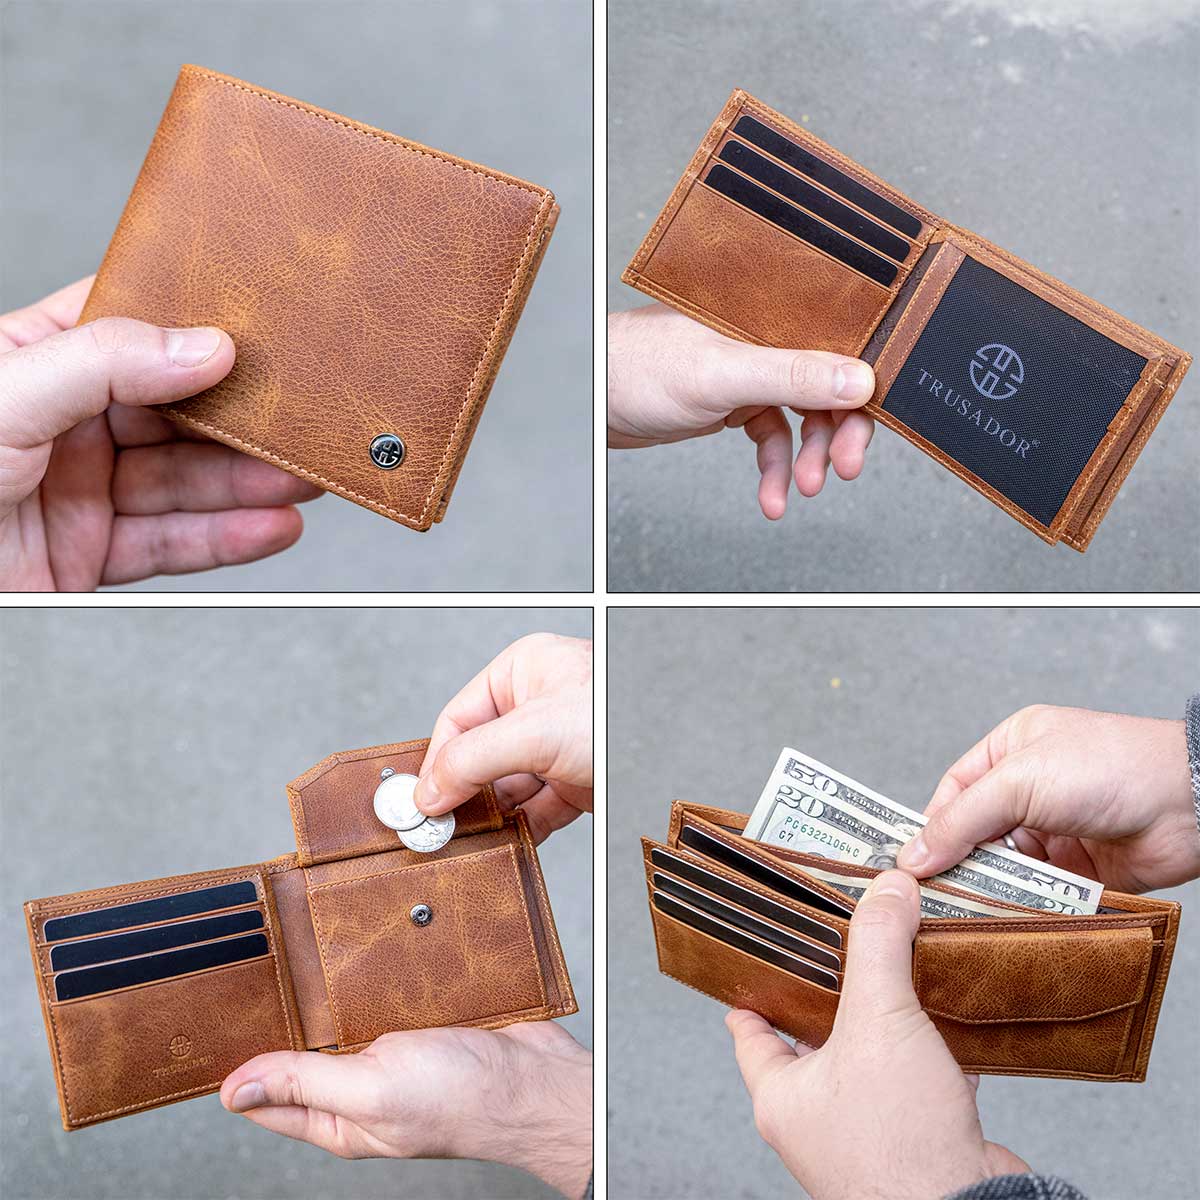 Coin Wallet, Leather Bi-fold Wallet with Coin Pouch